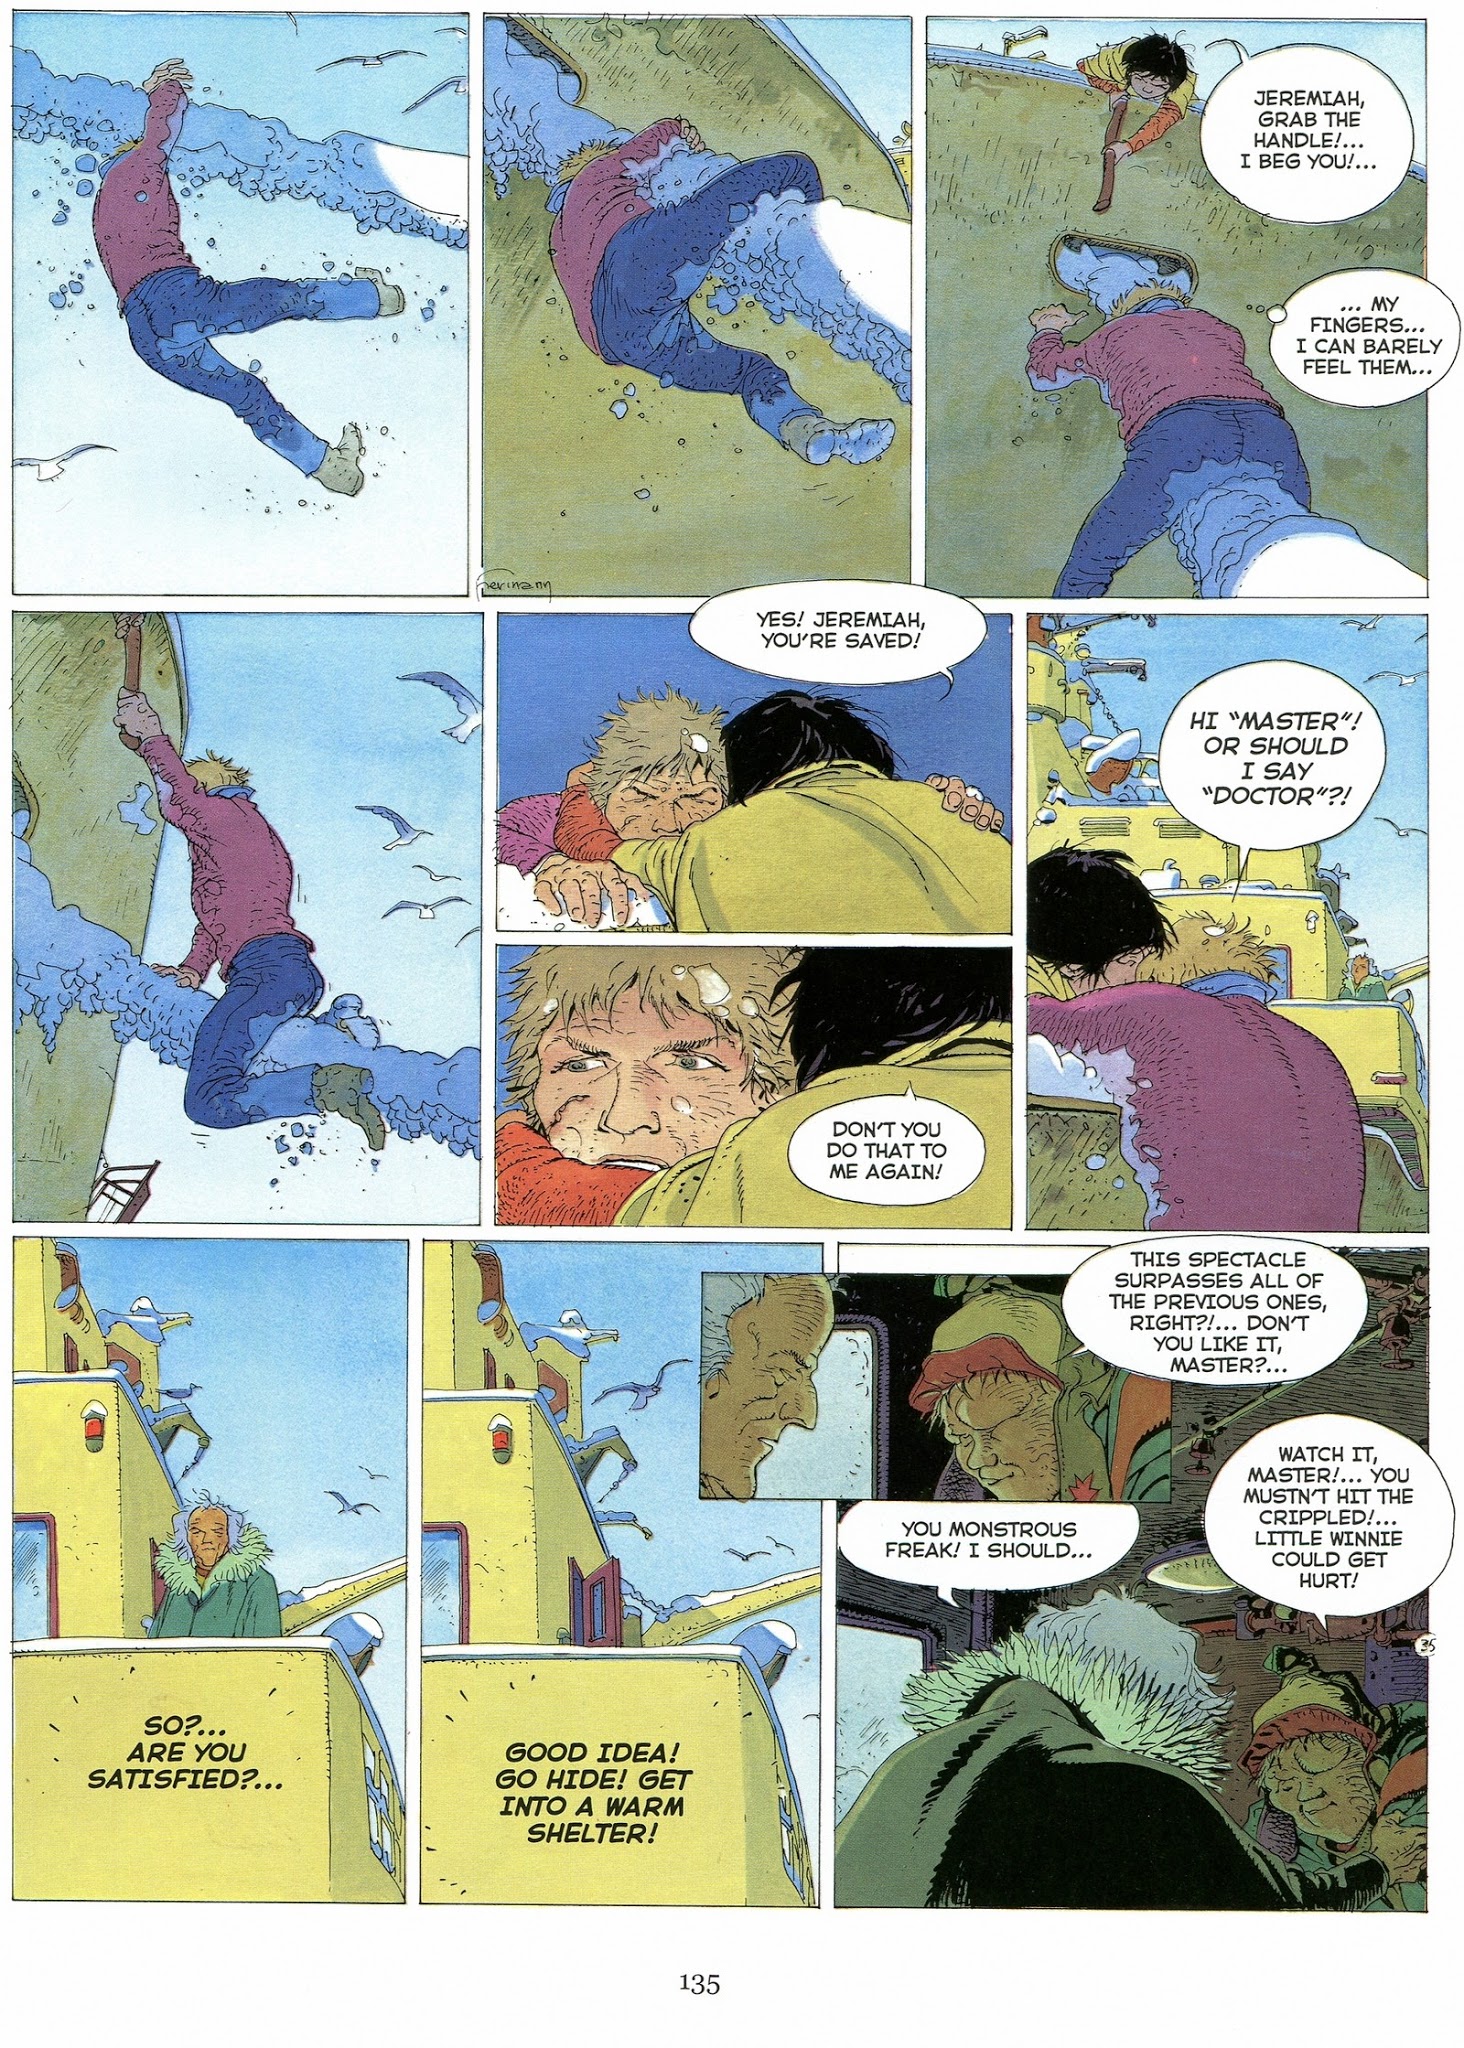 Read online Jeremiah by Hermann comic -  Issue # TPB 3 - 136